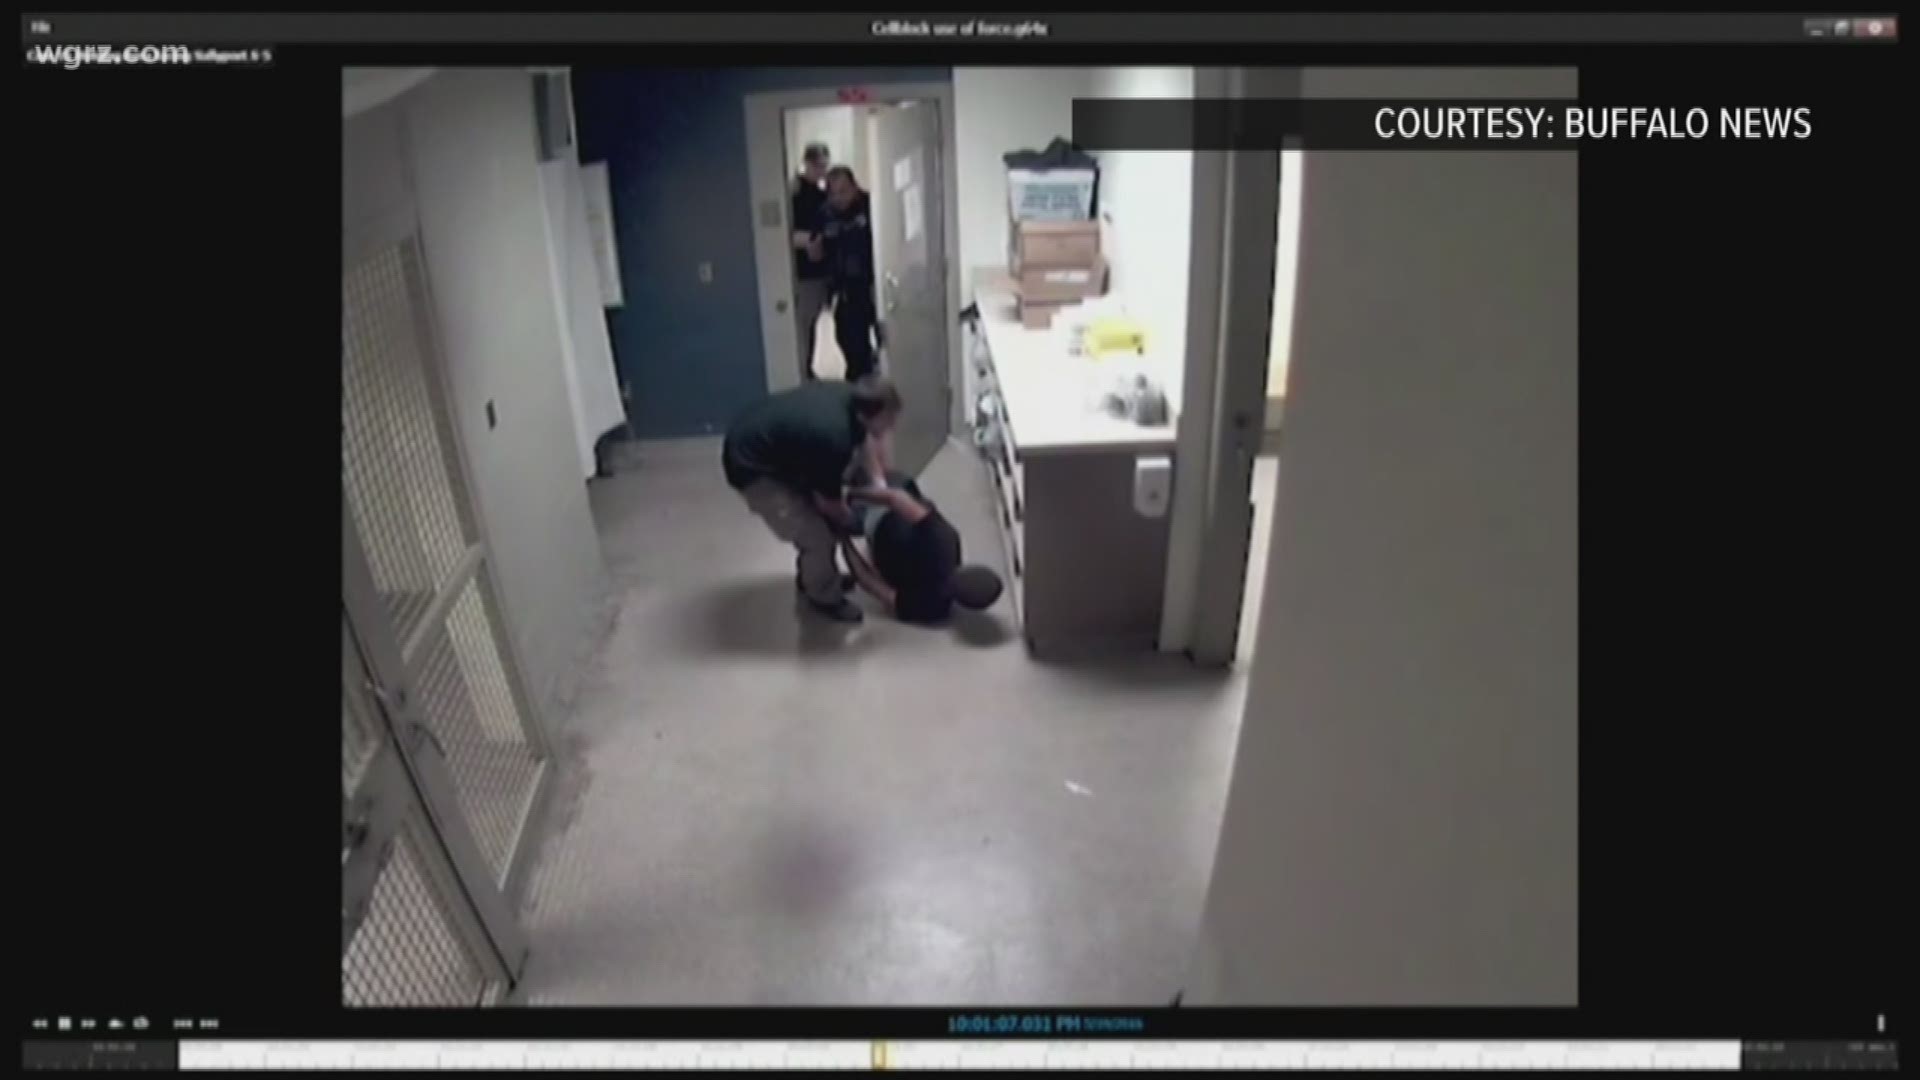 2016 assault video couldn't be releases because of  prosecution of jail attendant Matthew Jaskula.